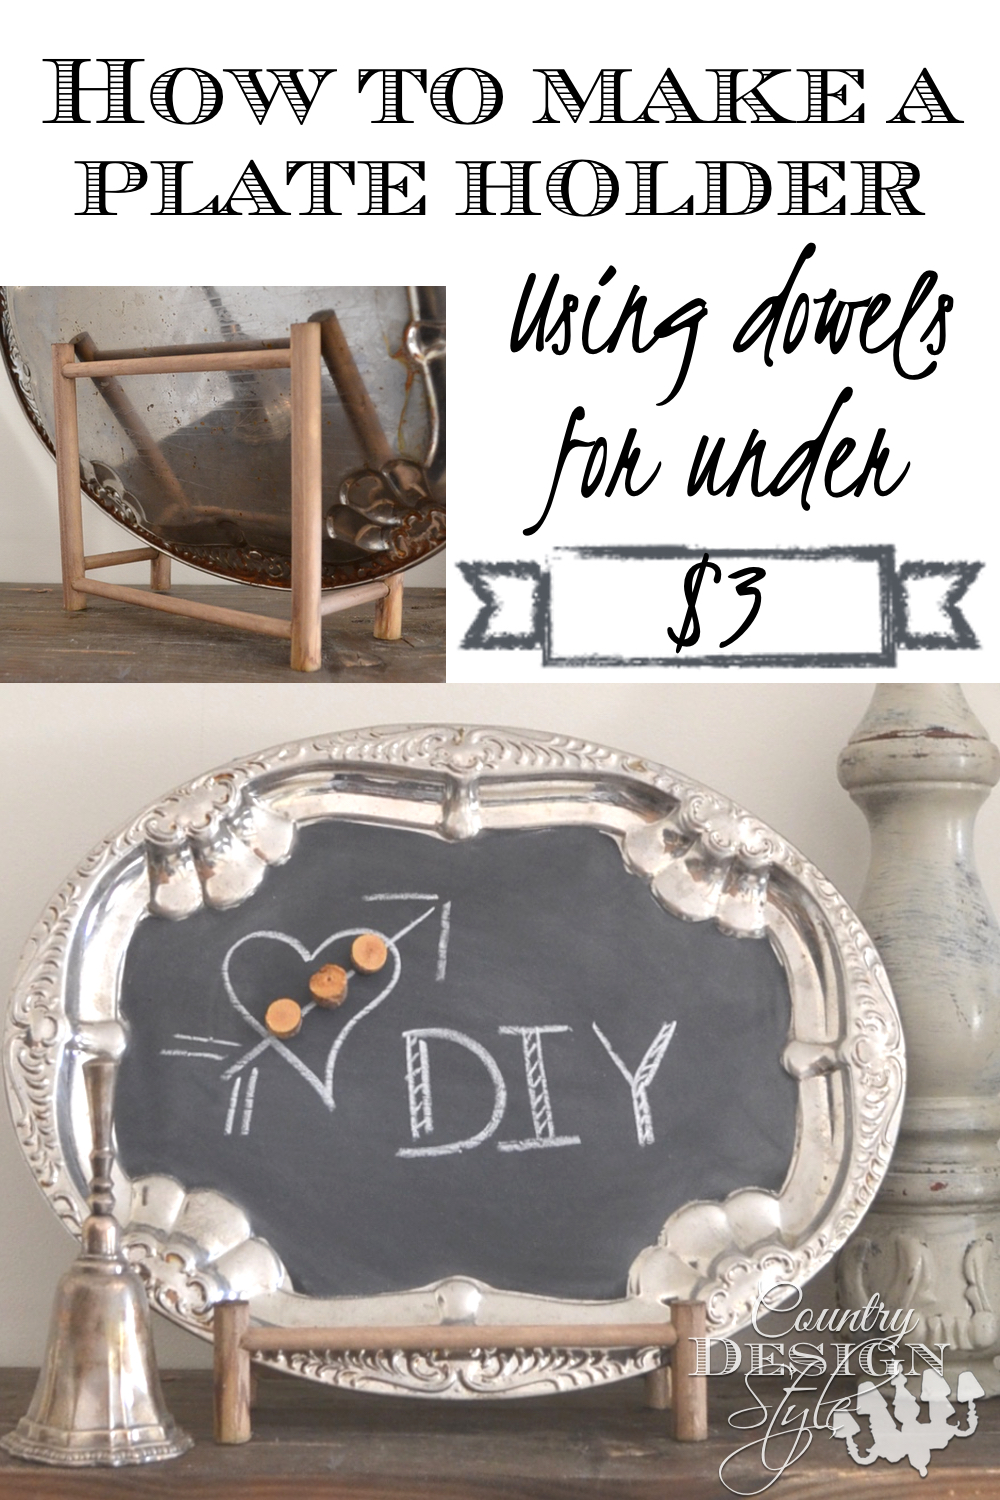 How to make a plate holder using dowels for under $3. In fact you can make 2! Country Design Style